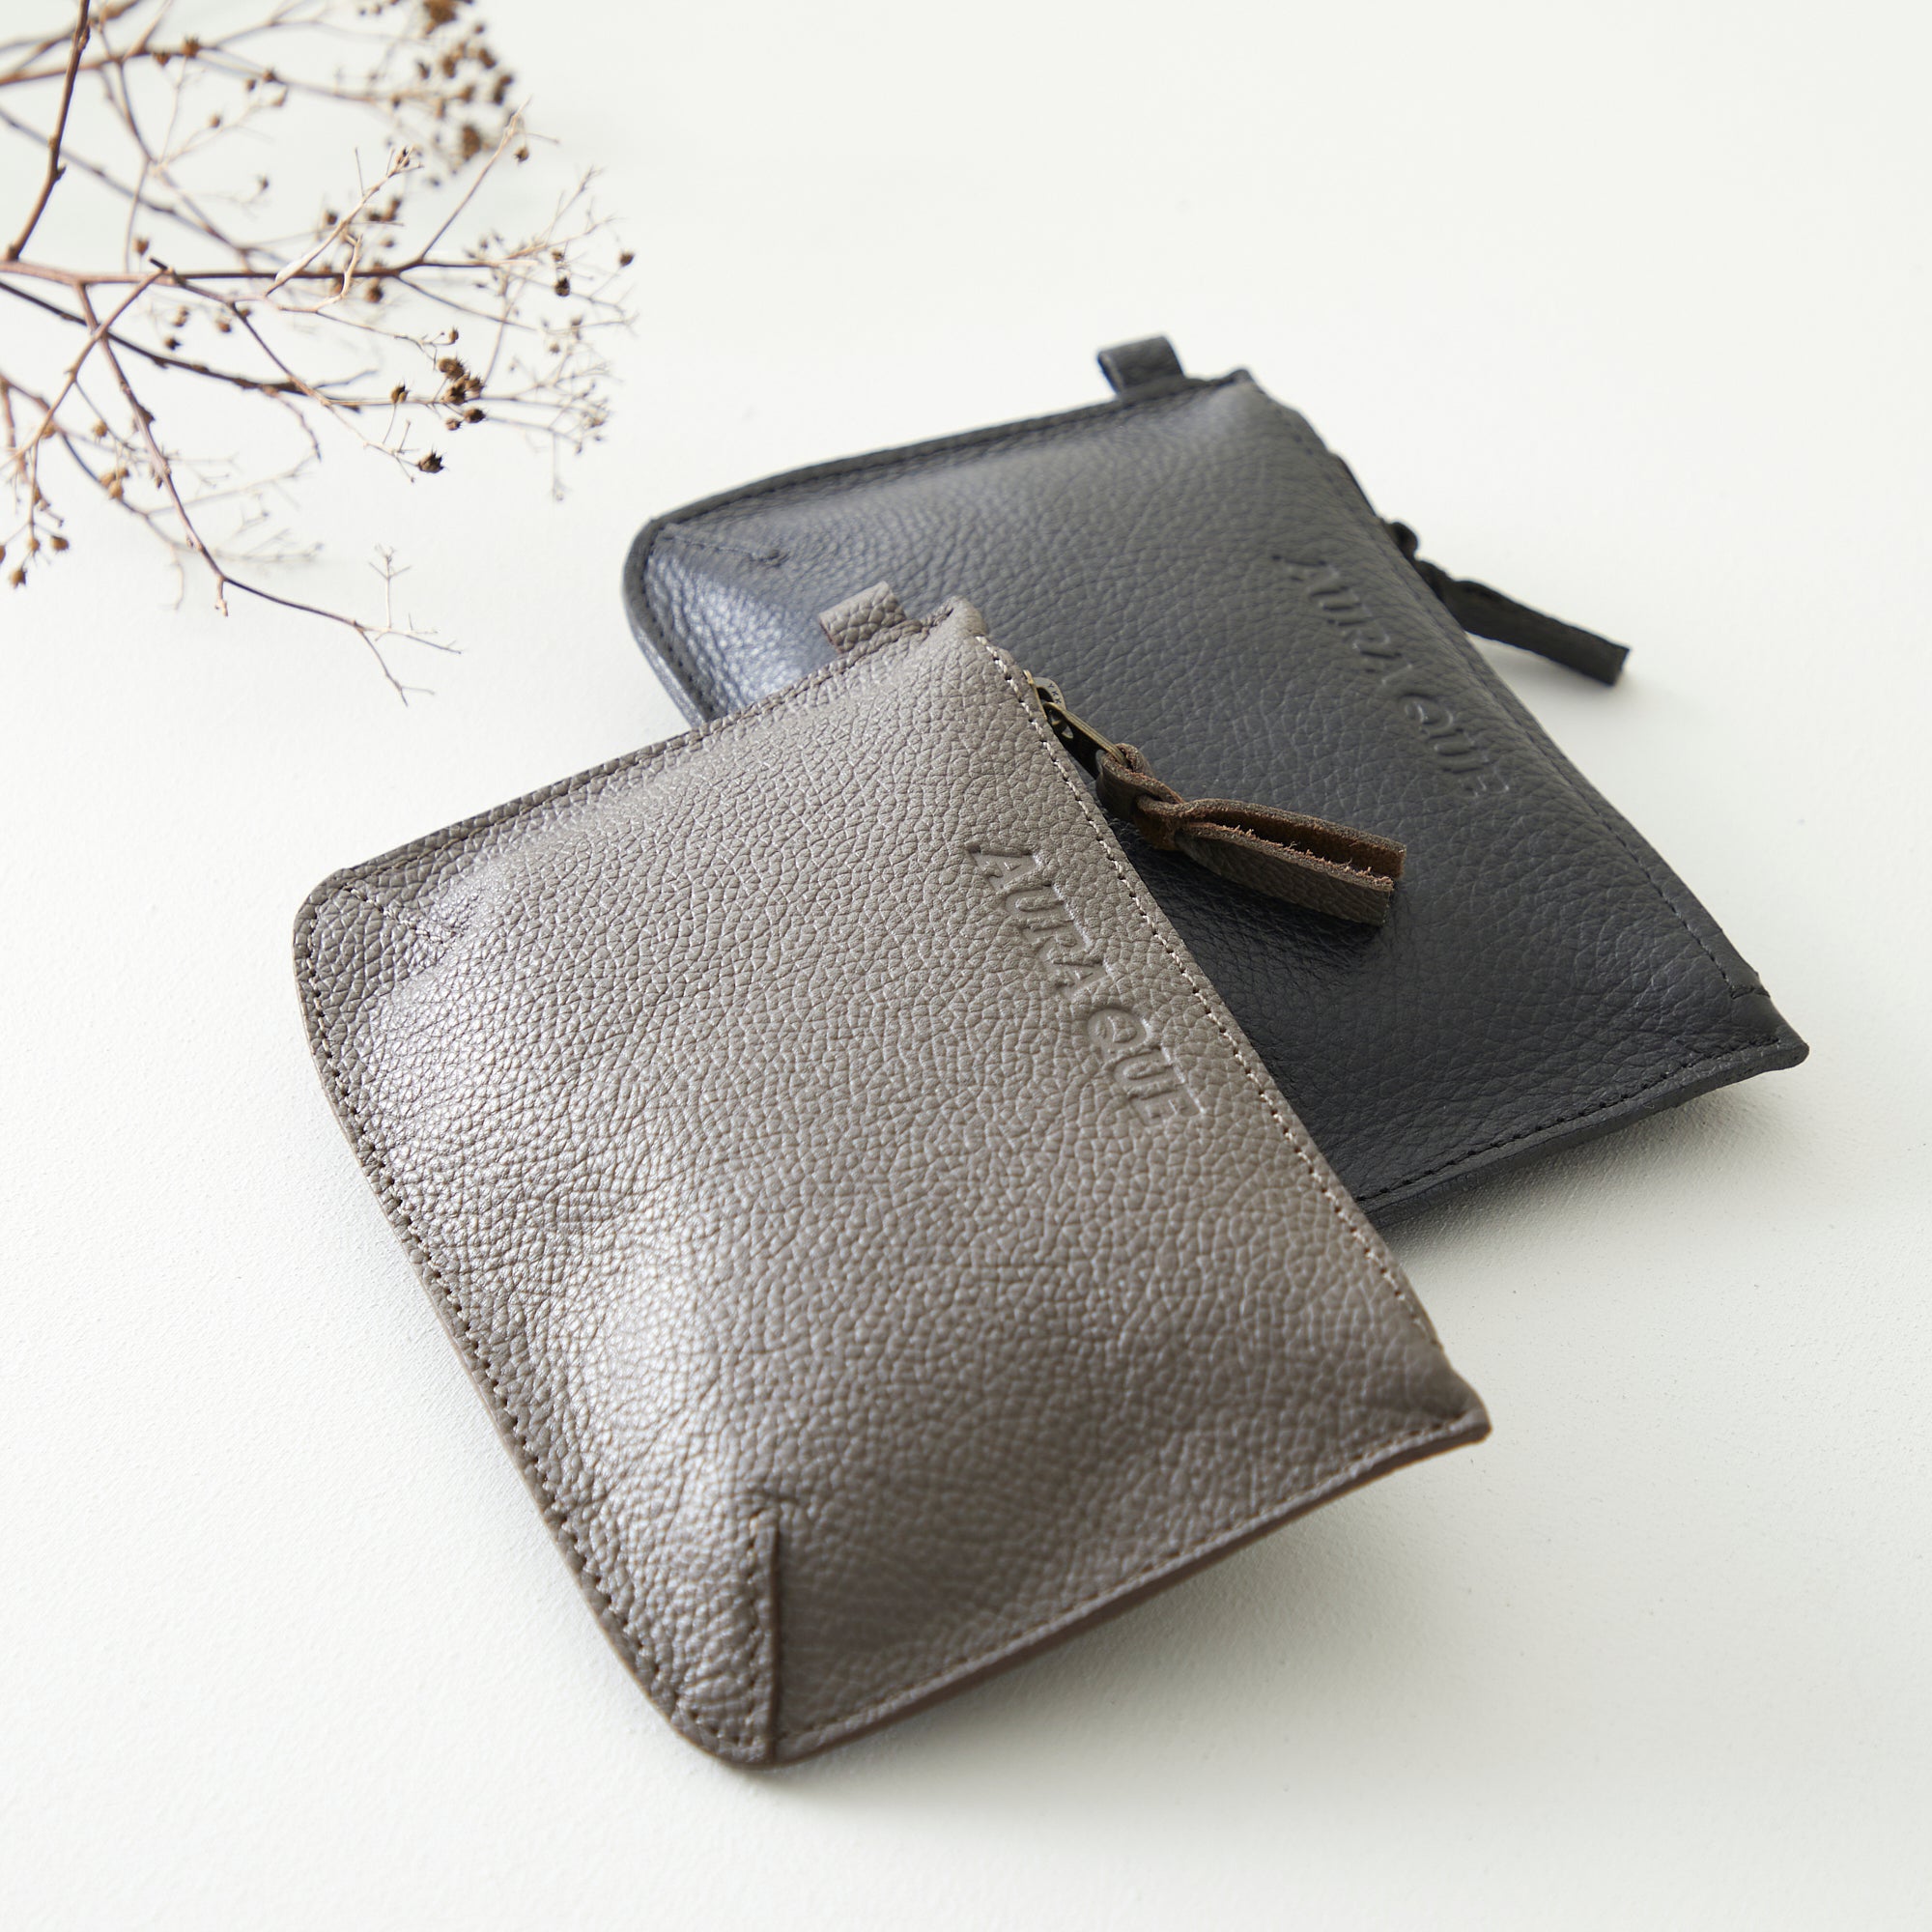 Leather Coin Purses and Pouches Hold Your Change